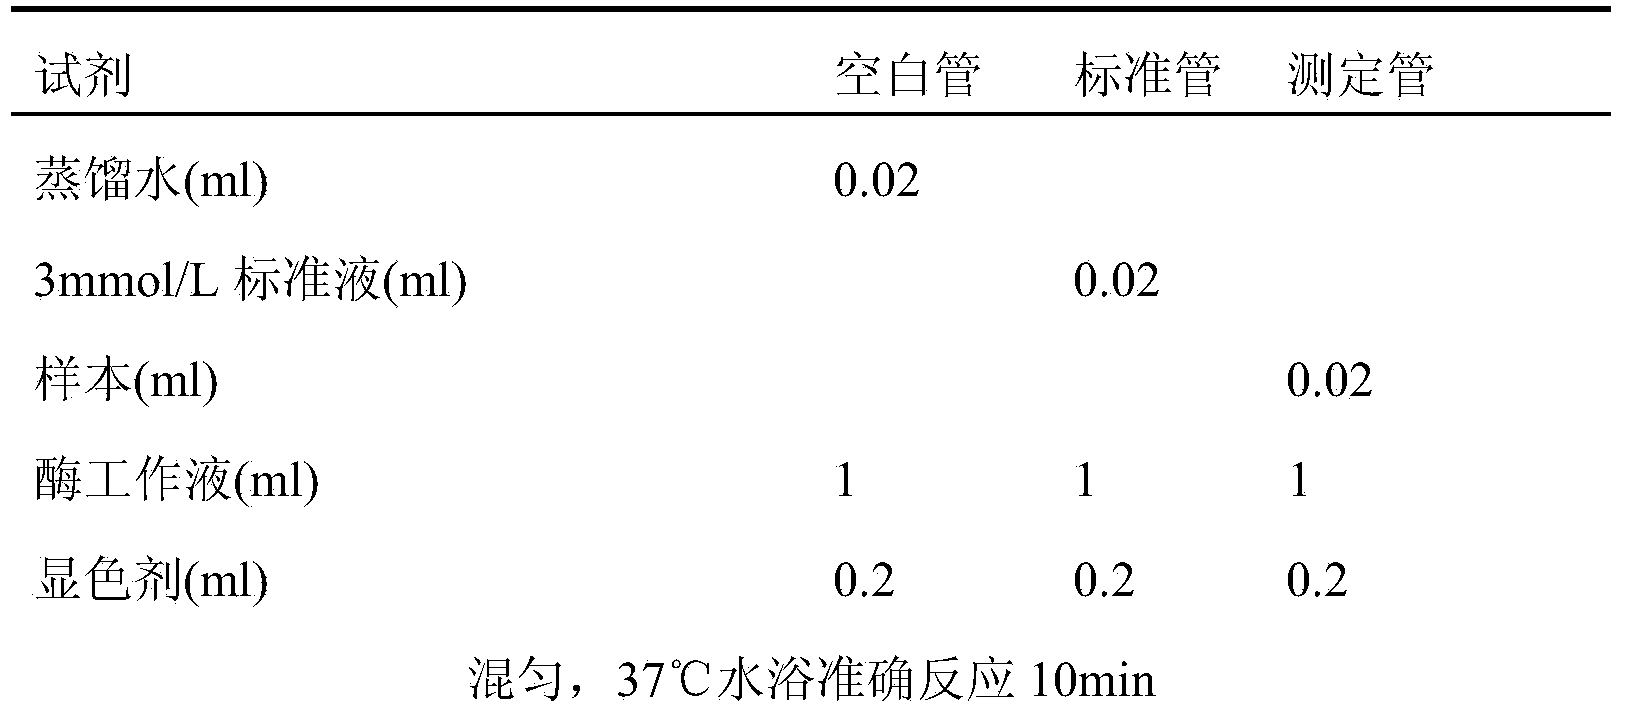 Method for extracting anti-cerebral ischemia substance from China rose and application of extracted anti-cerebral ischemia substance